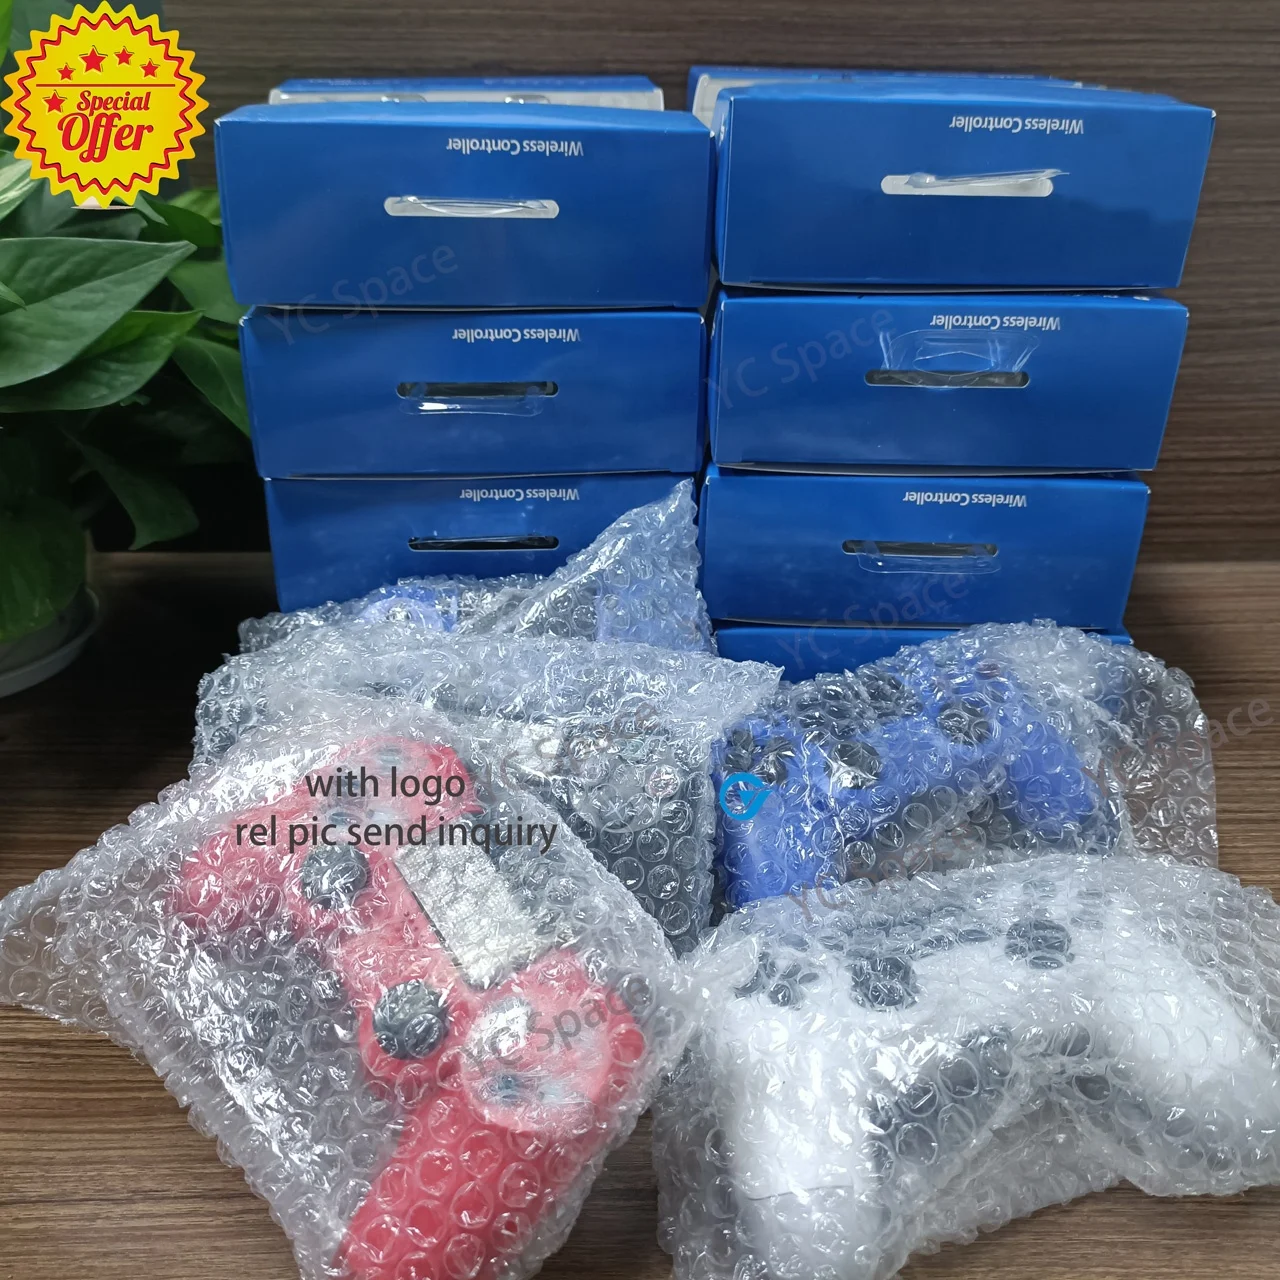 Factory Price Original Logo BT PS4 Controller Full Faction Joystick Wireless Game Manette Console PS2 PS3 PS4 PS5 Controller